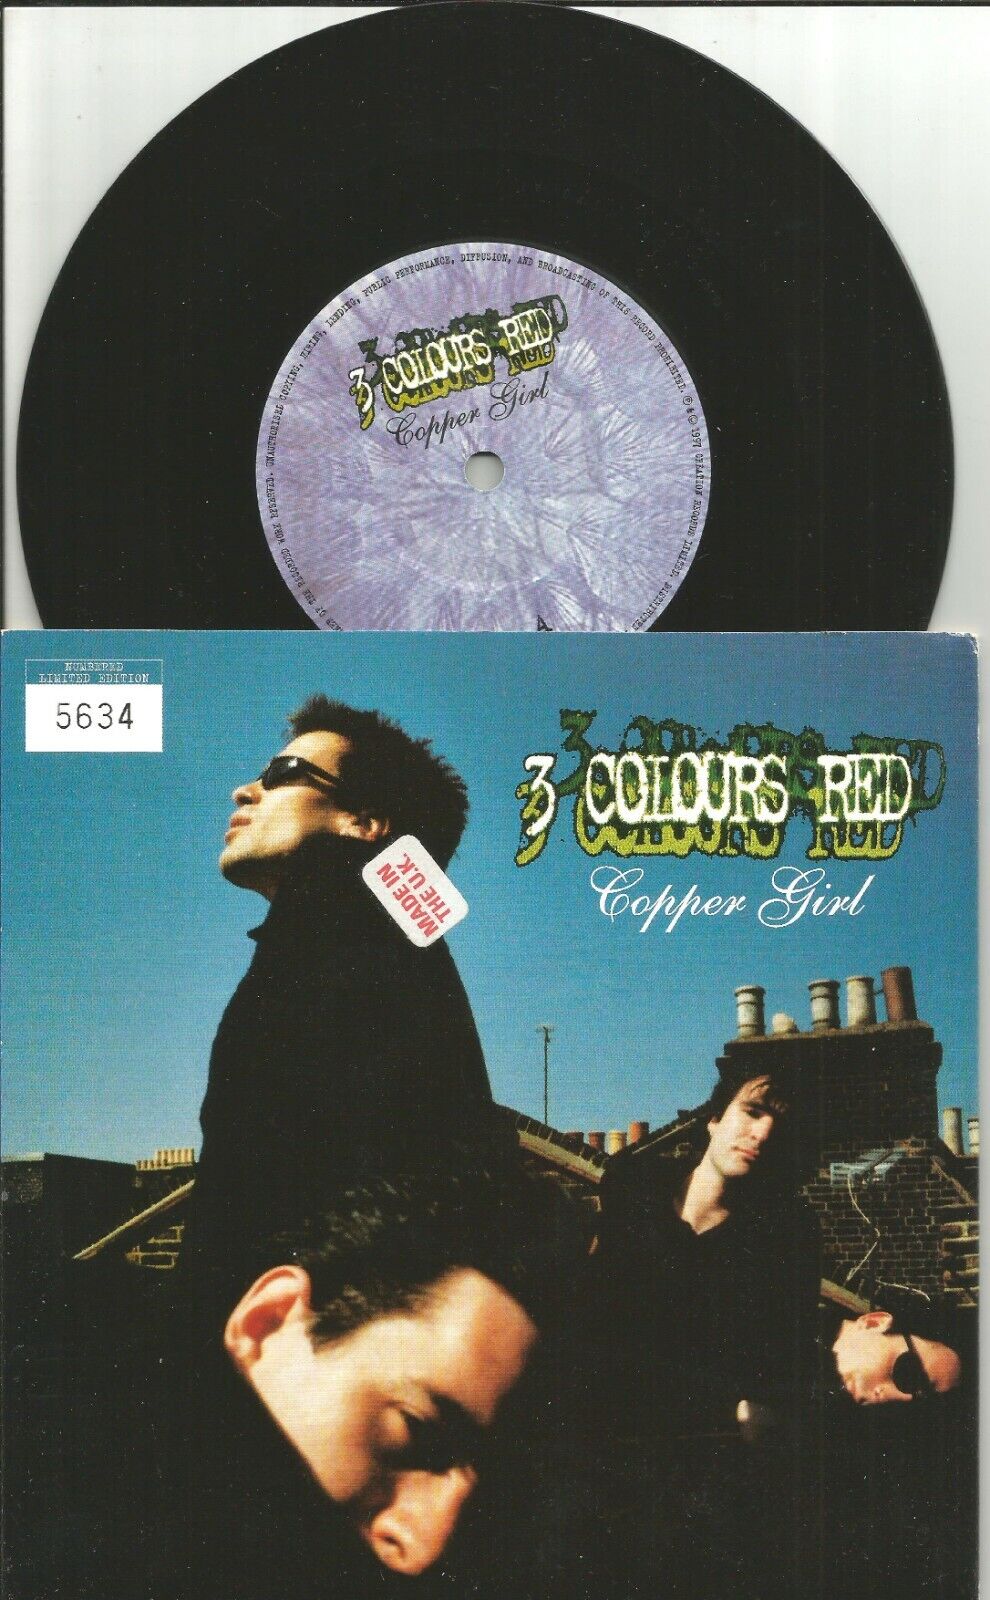 3 COLOURS RED Copper w/ Sunny LIVE TRK Numbered EUROPE 7 INCH VINYL three Colors